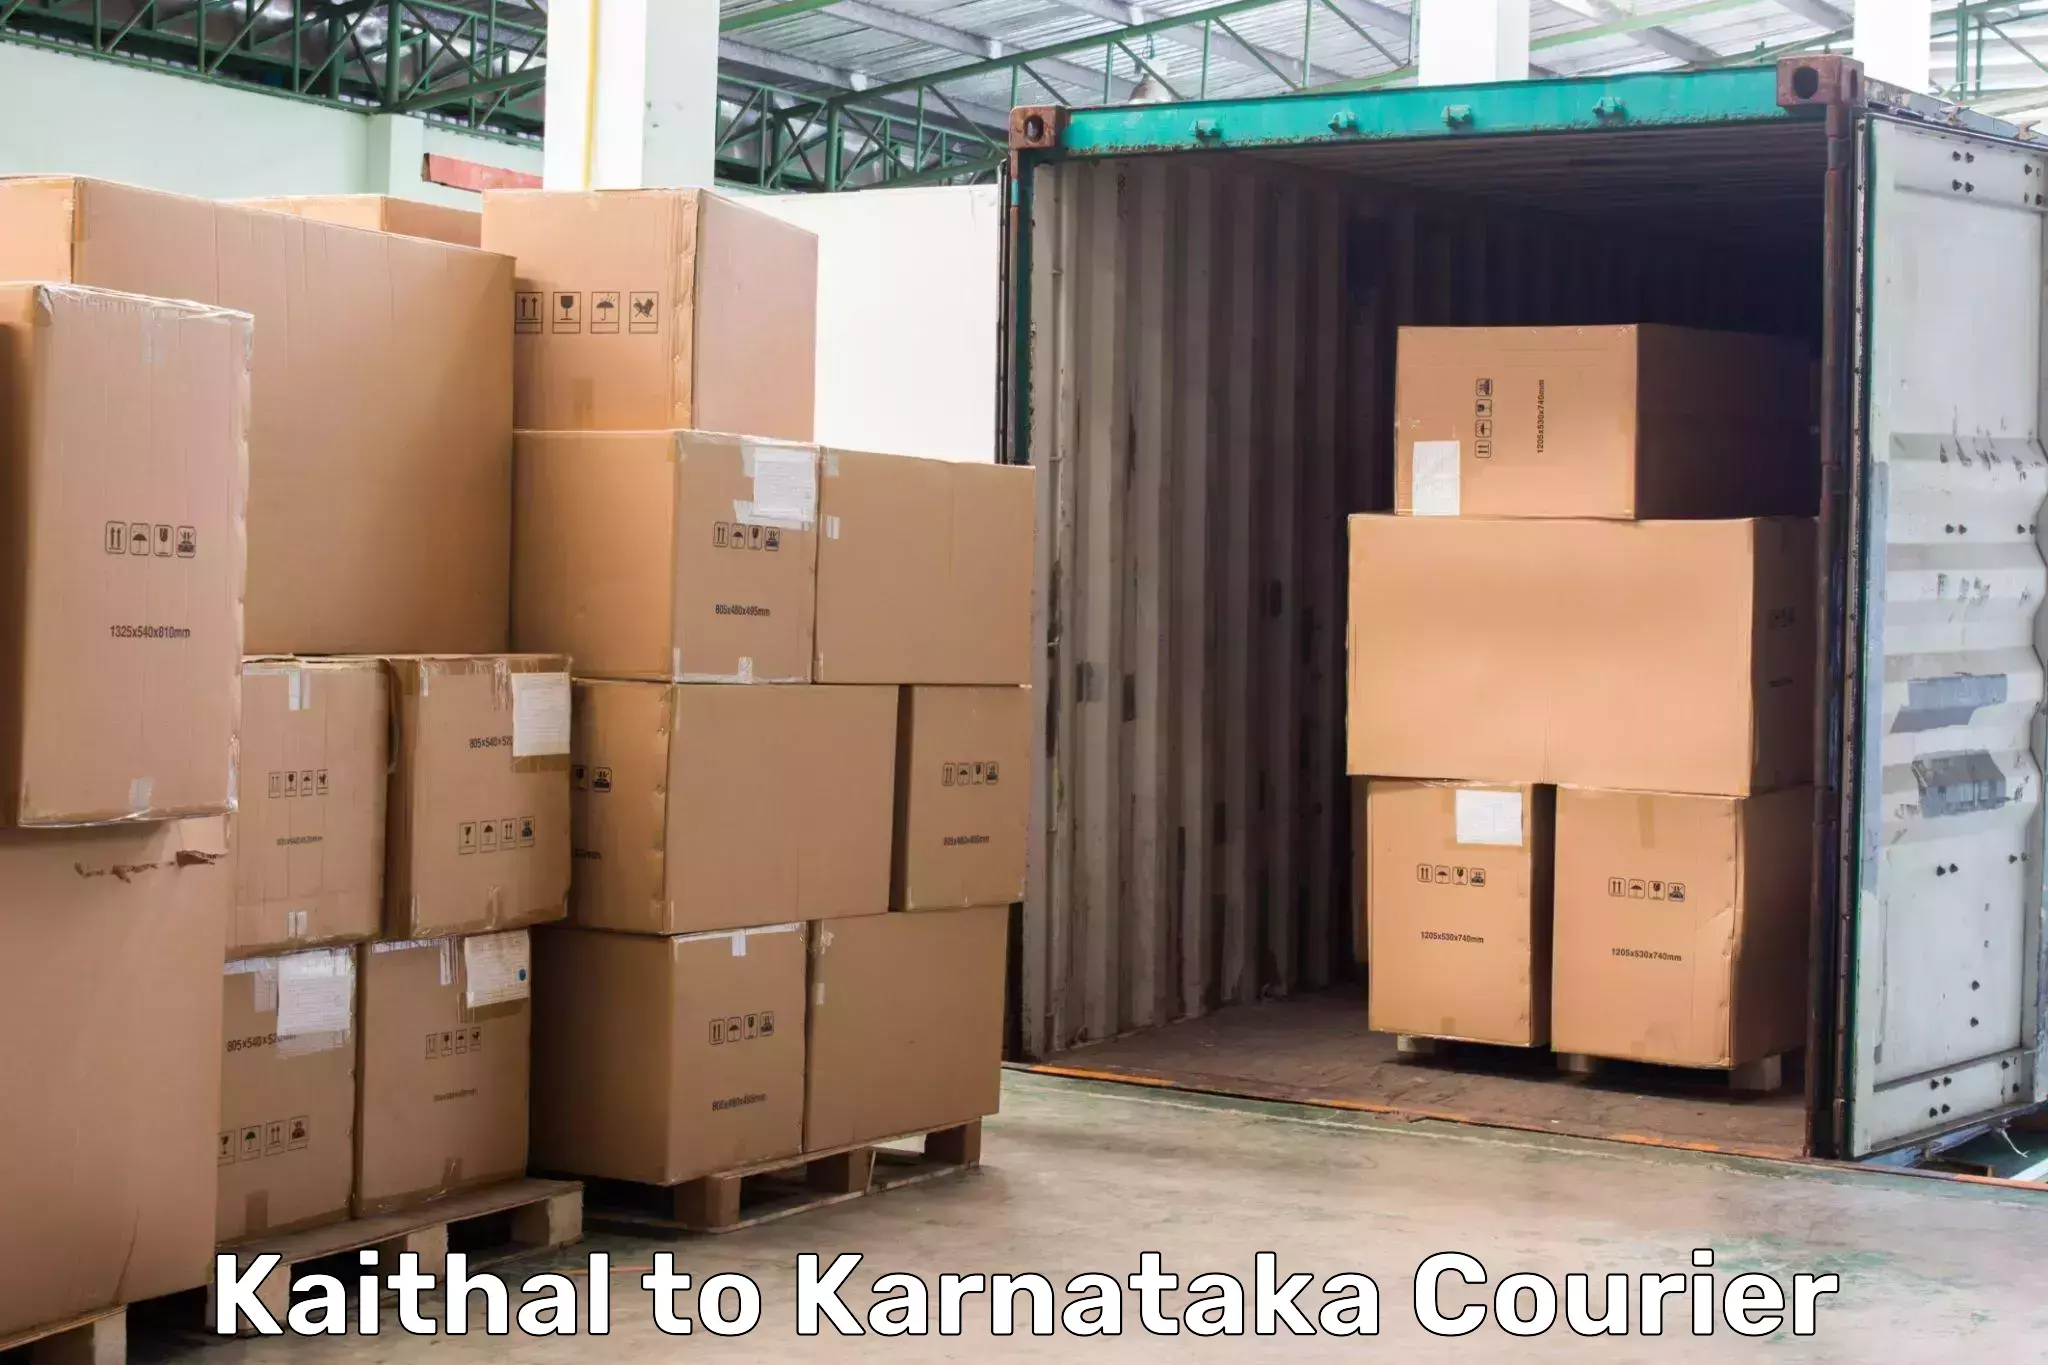 Nationwide parcel services Kaithal to Bangalore